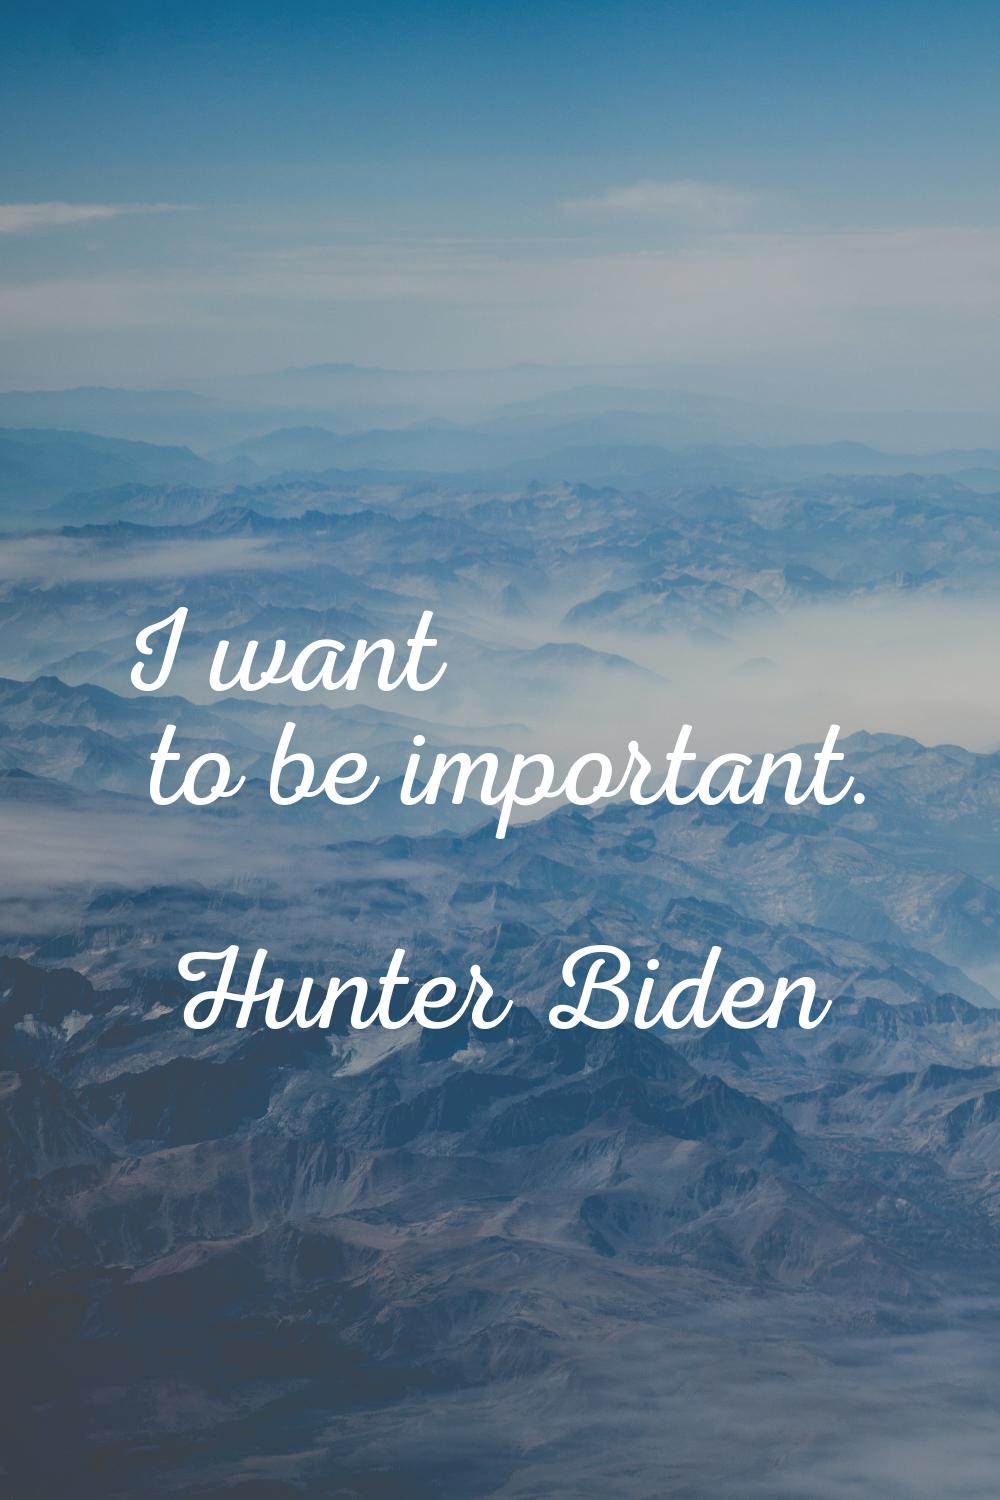 I want to be important.